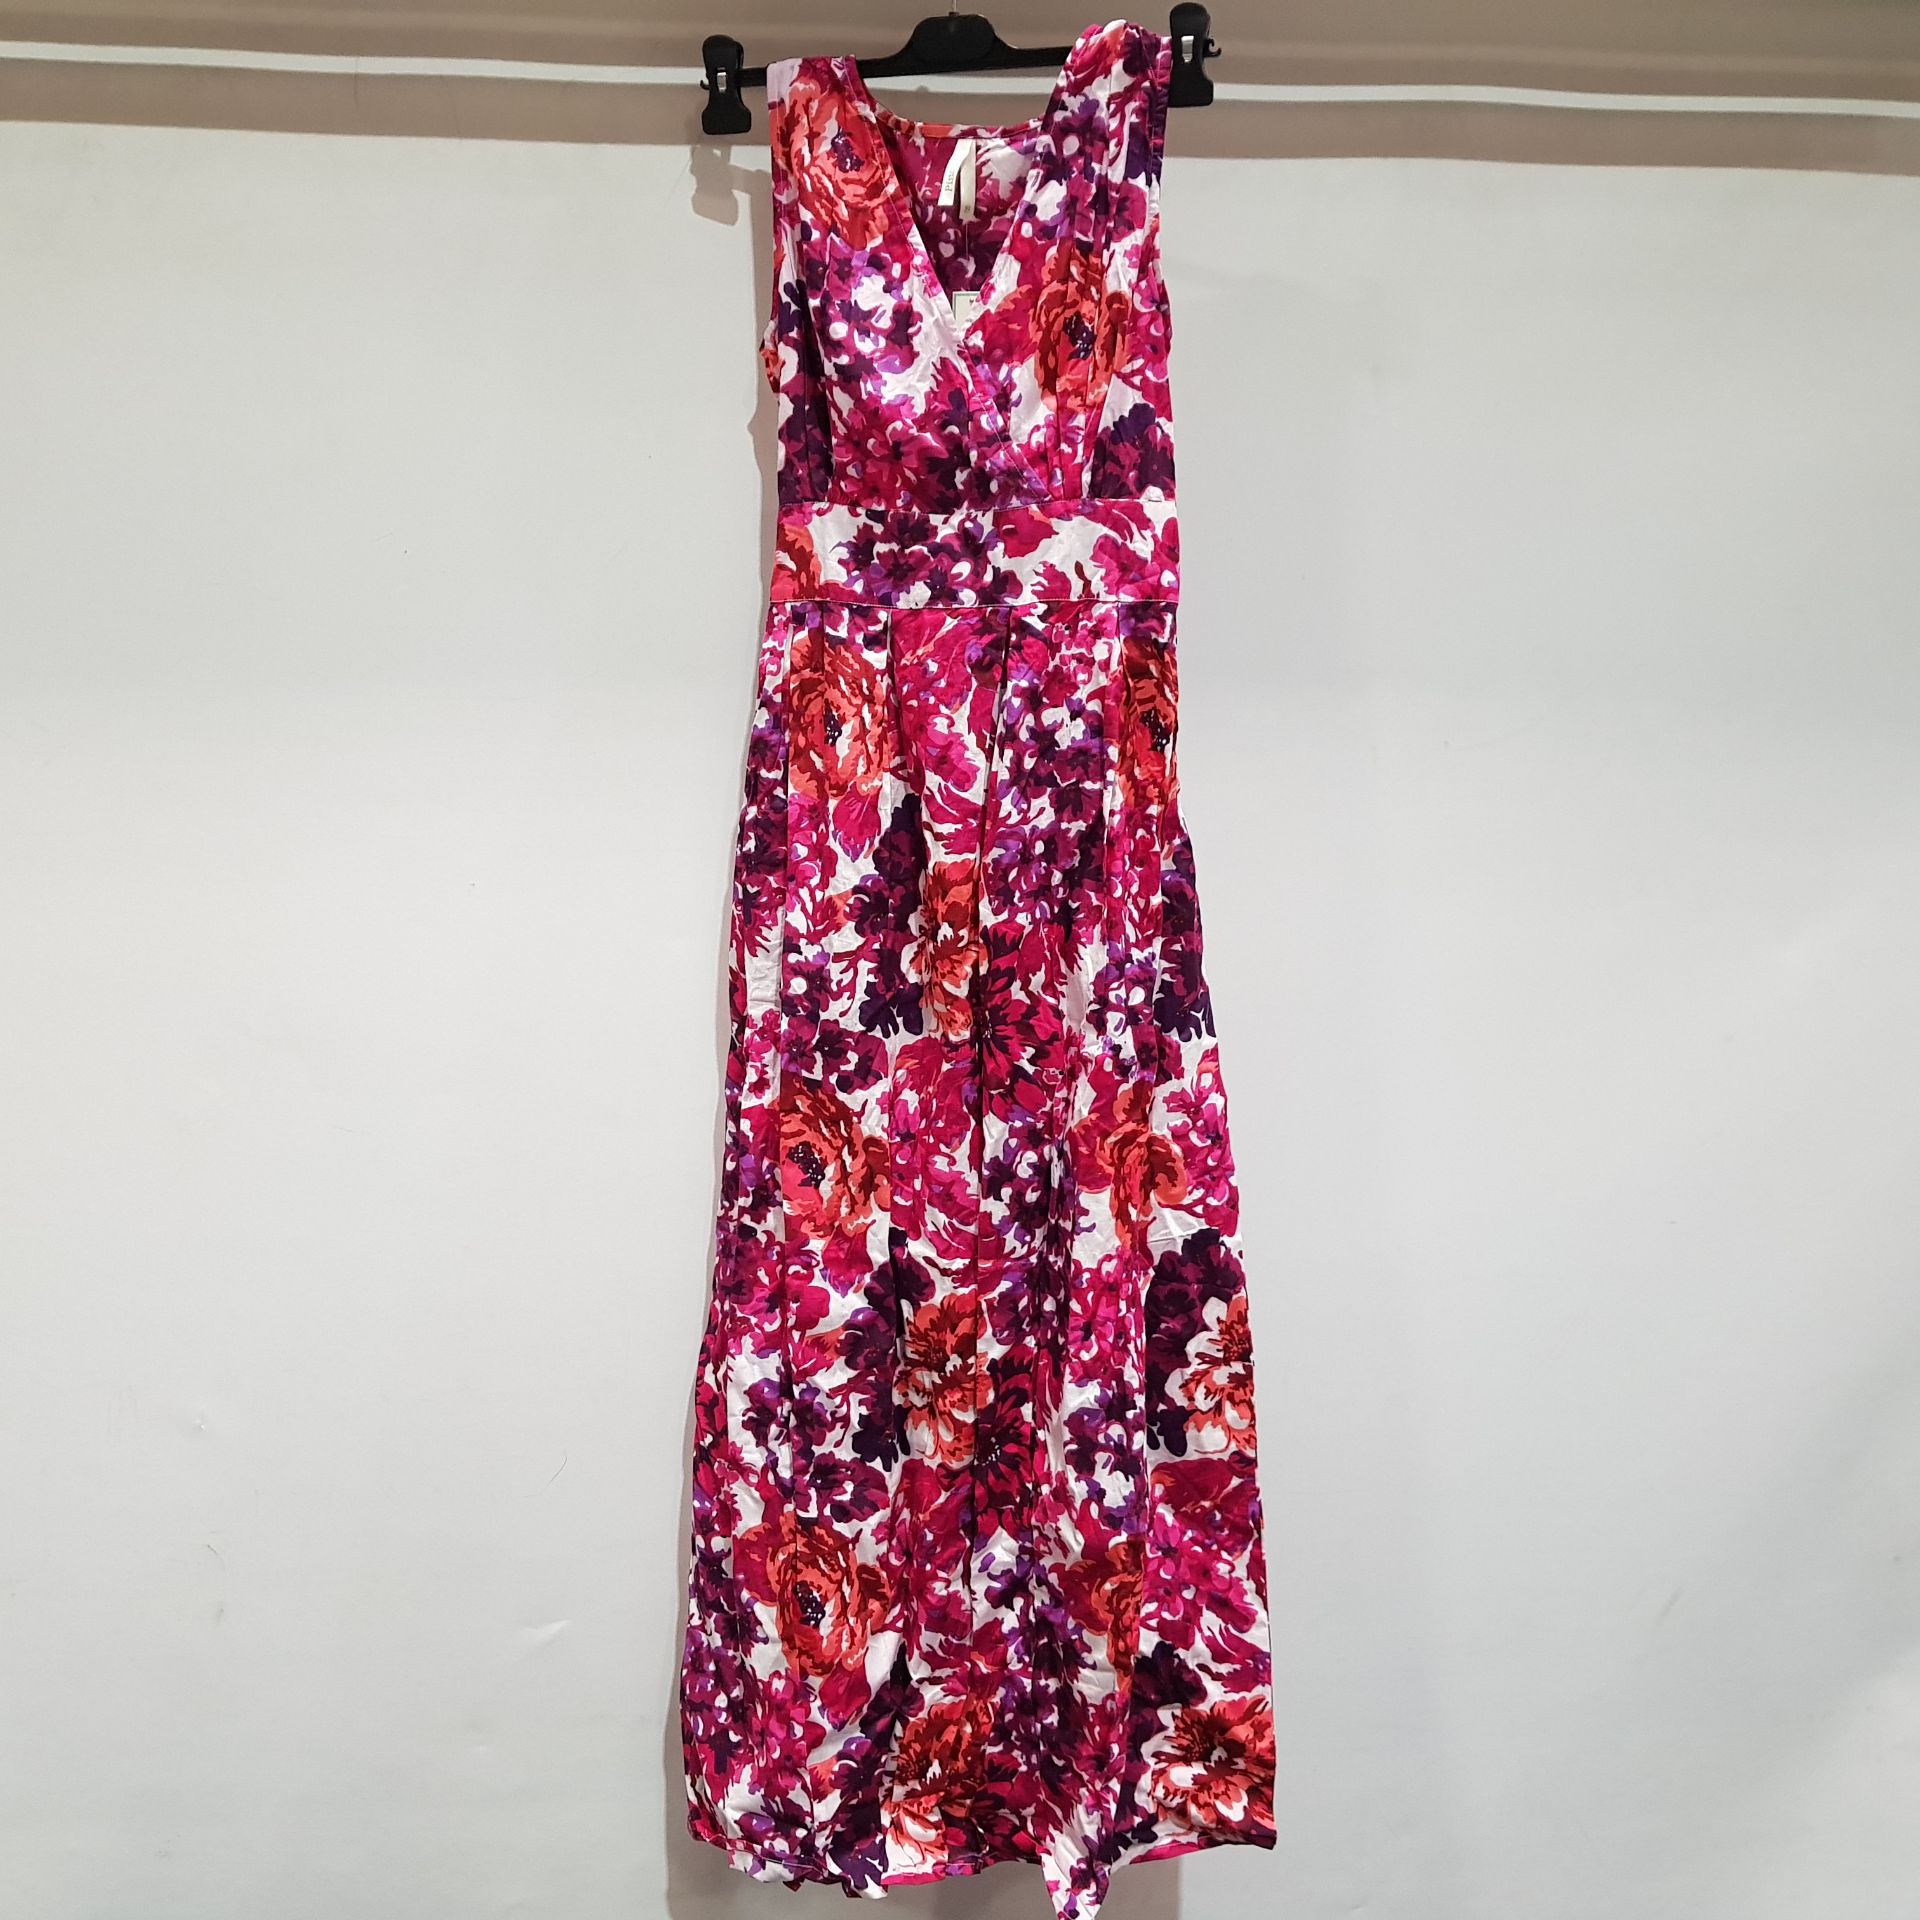 11 X BRAND NEW PISTACHIO PINK FLORAL V NECK LONG SUMMER DRESS SIZE SMALL RRP £24.99 TOTAL £274.89